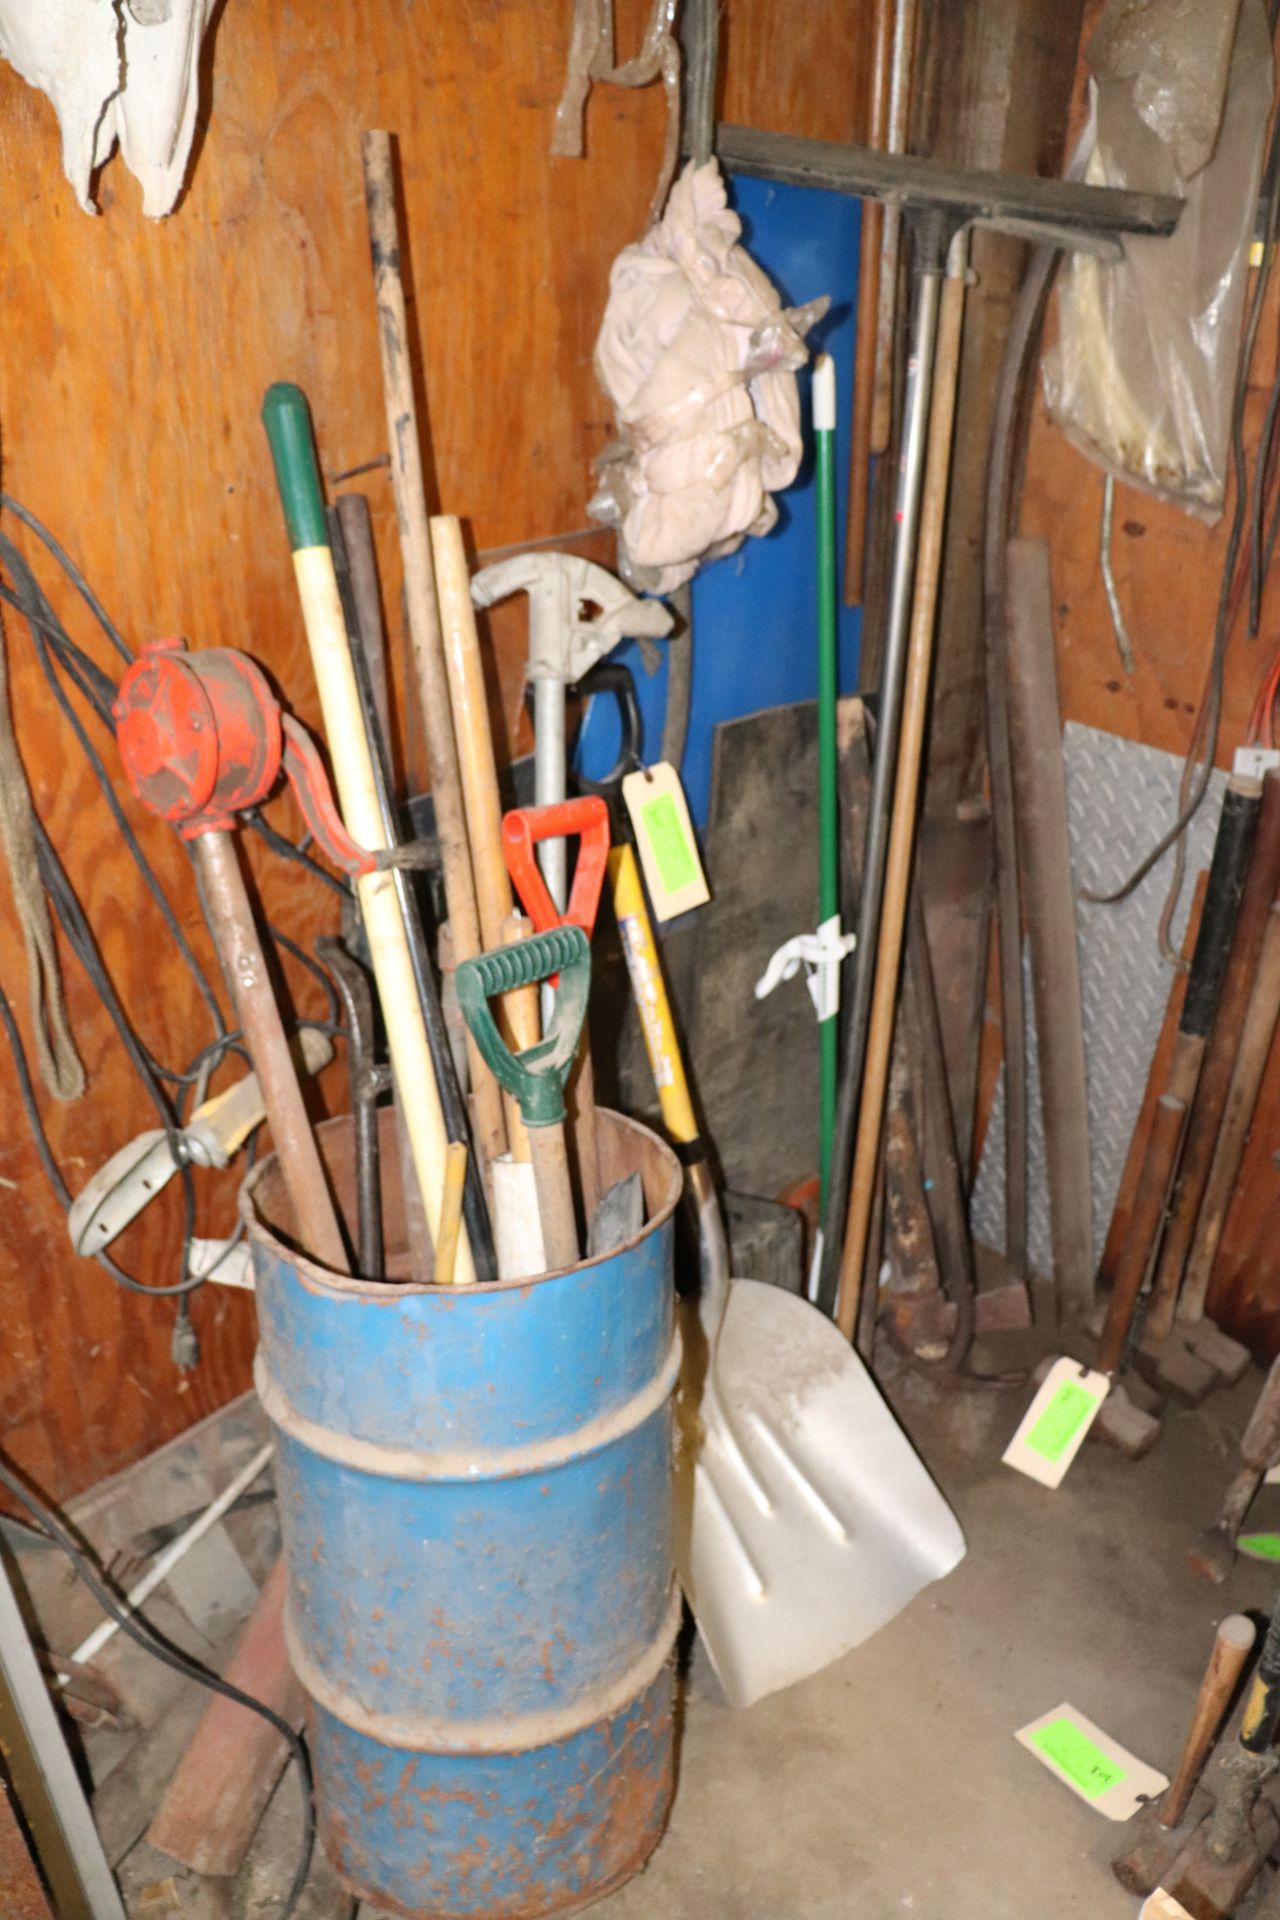 Assorted yard implements, cleaning mops, brooms, pipe bender, shovels, etc.